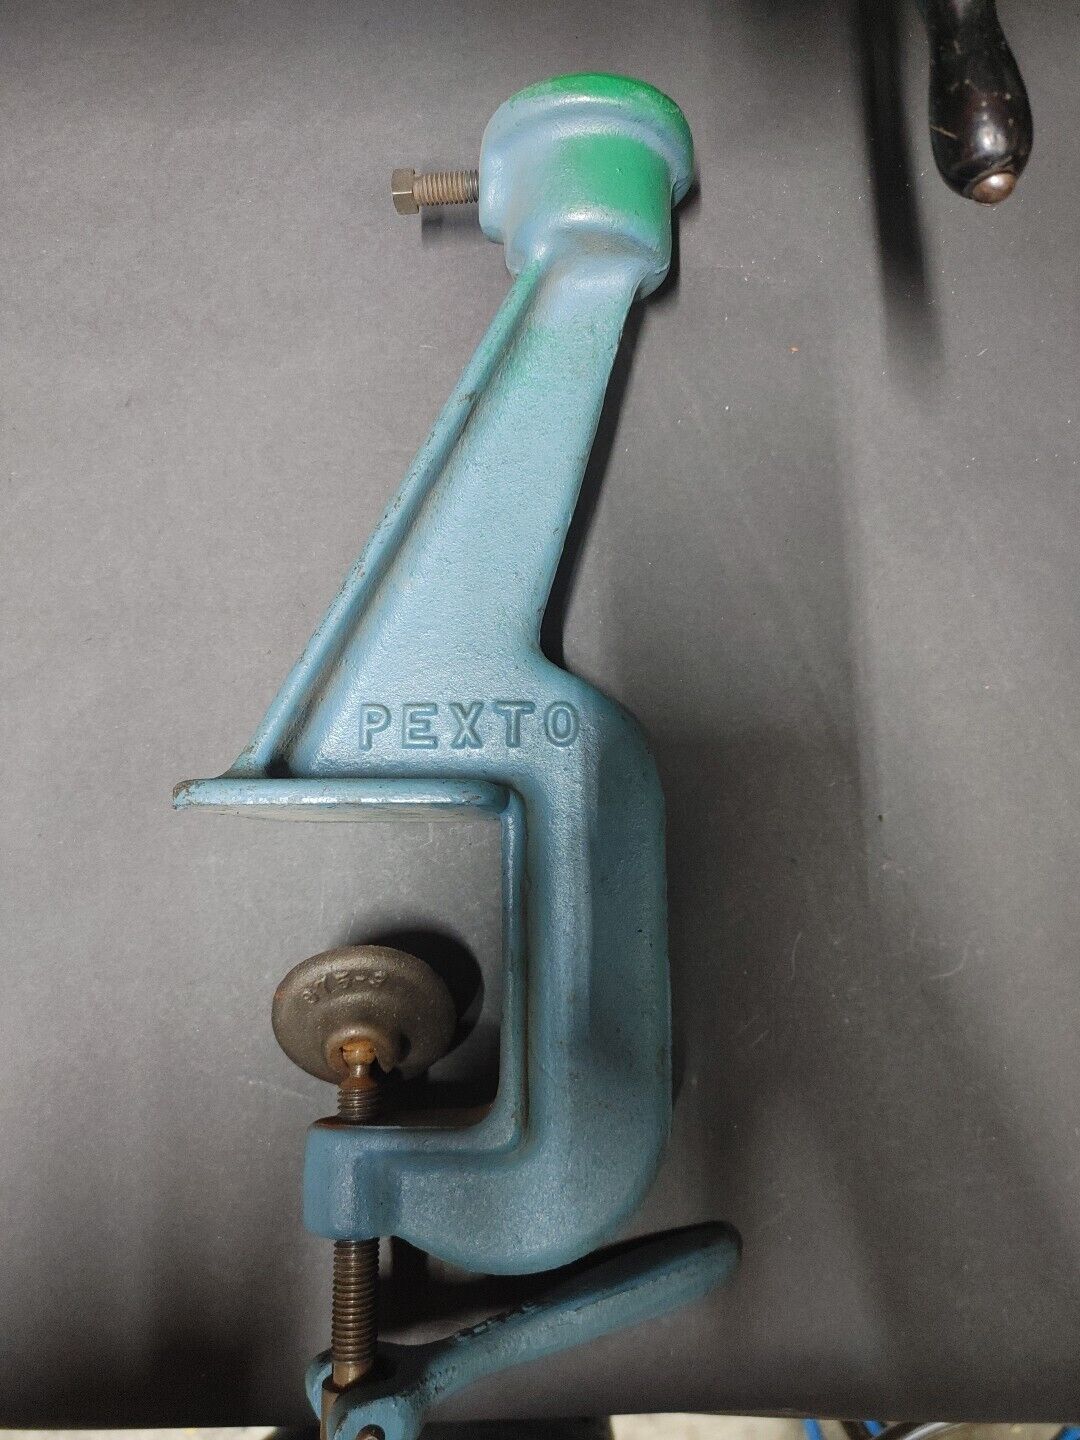 Pexto #975 bead roller bench mount stand